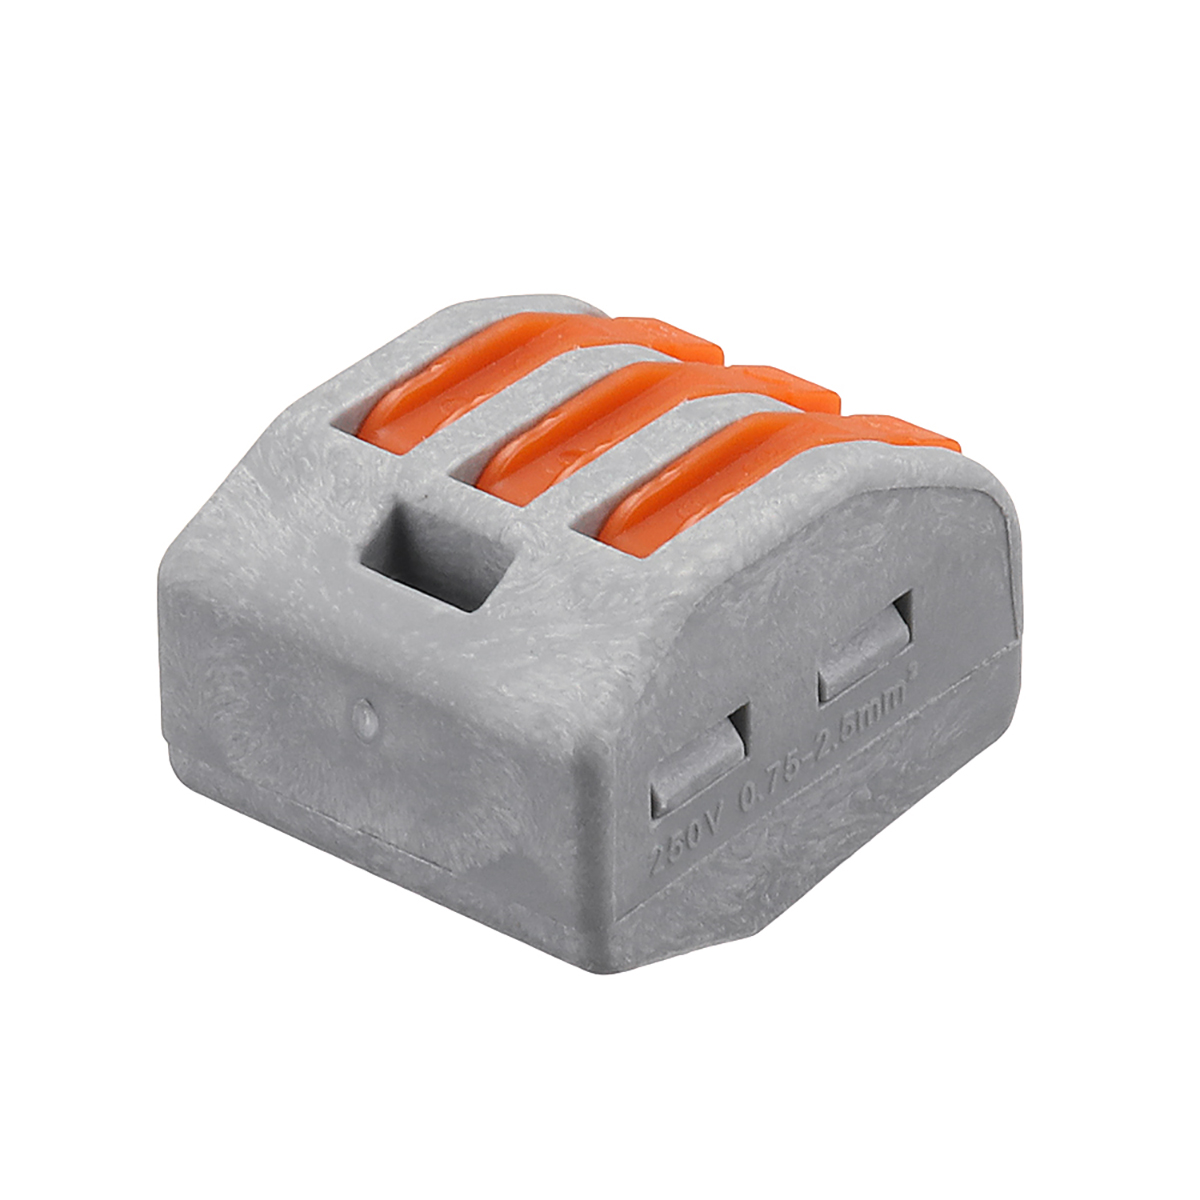 Excellwayreg-30Pcs-235-Holes-Spring-Conductor-Terminal-Block-Electric-Cable-Wire-Connector-1389031-9